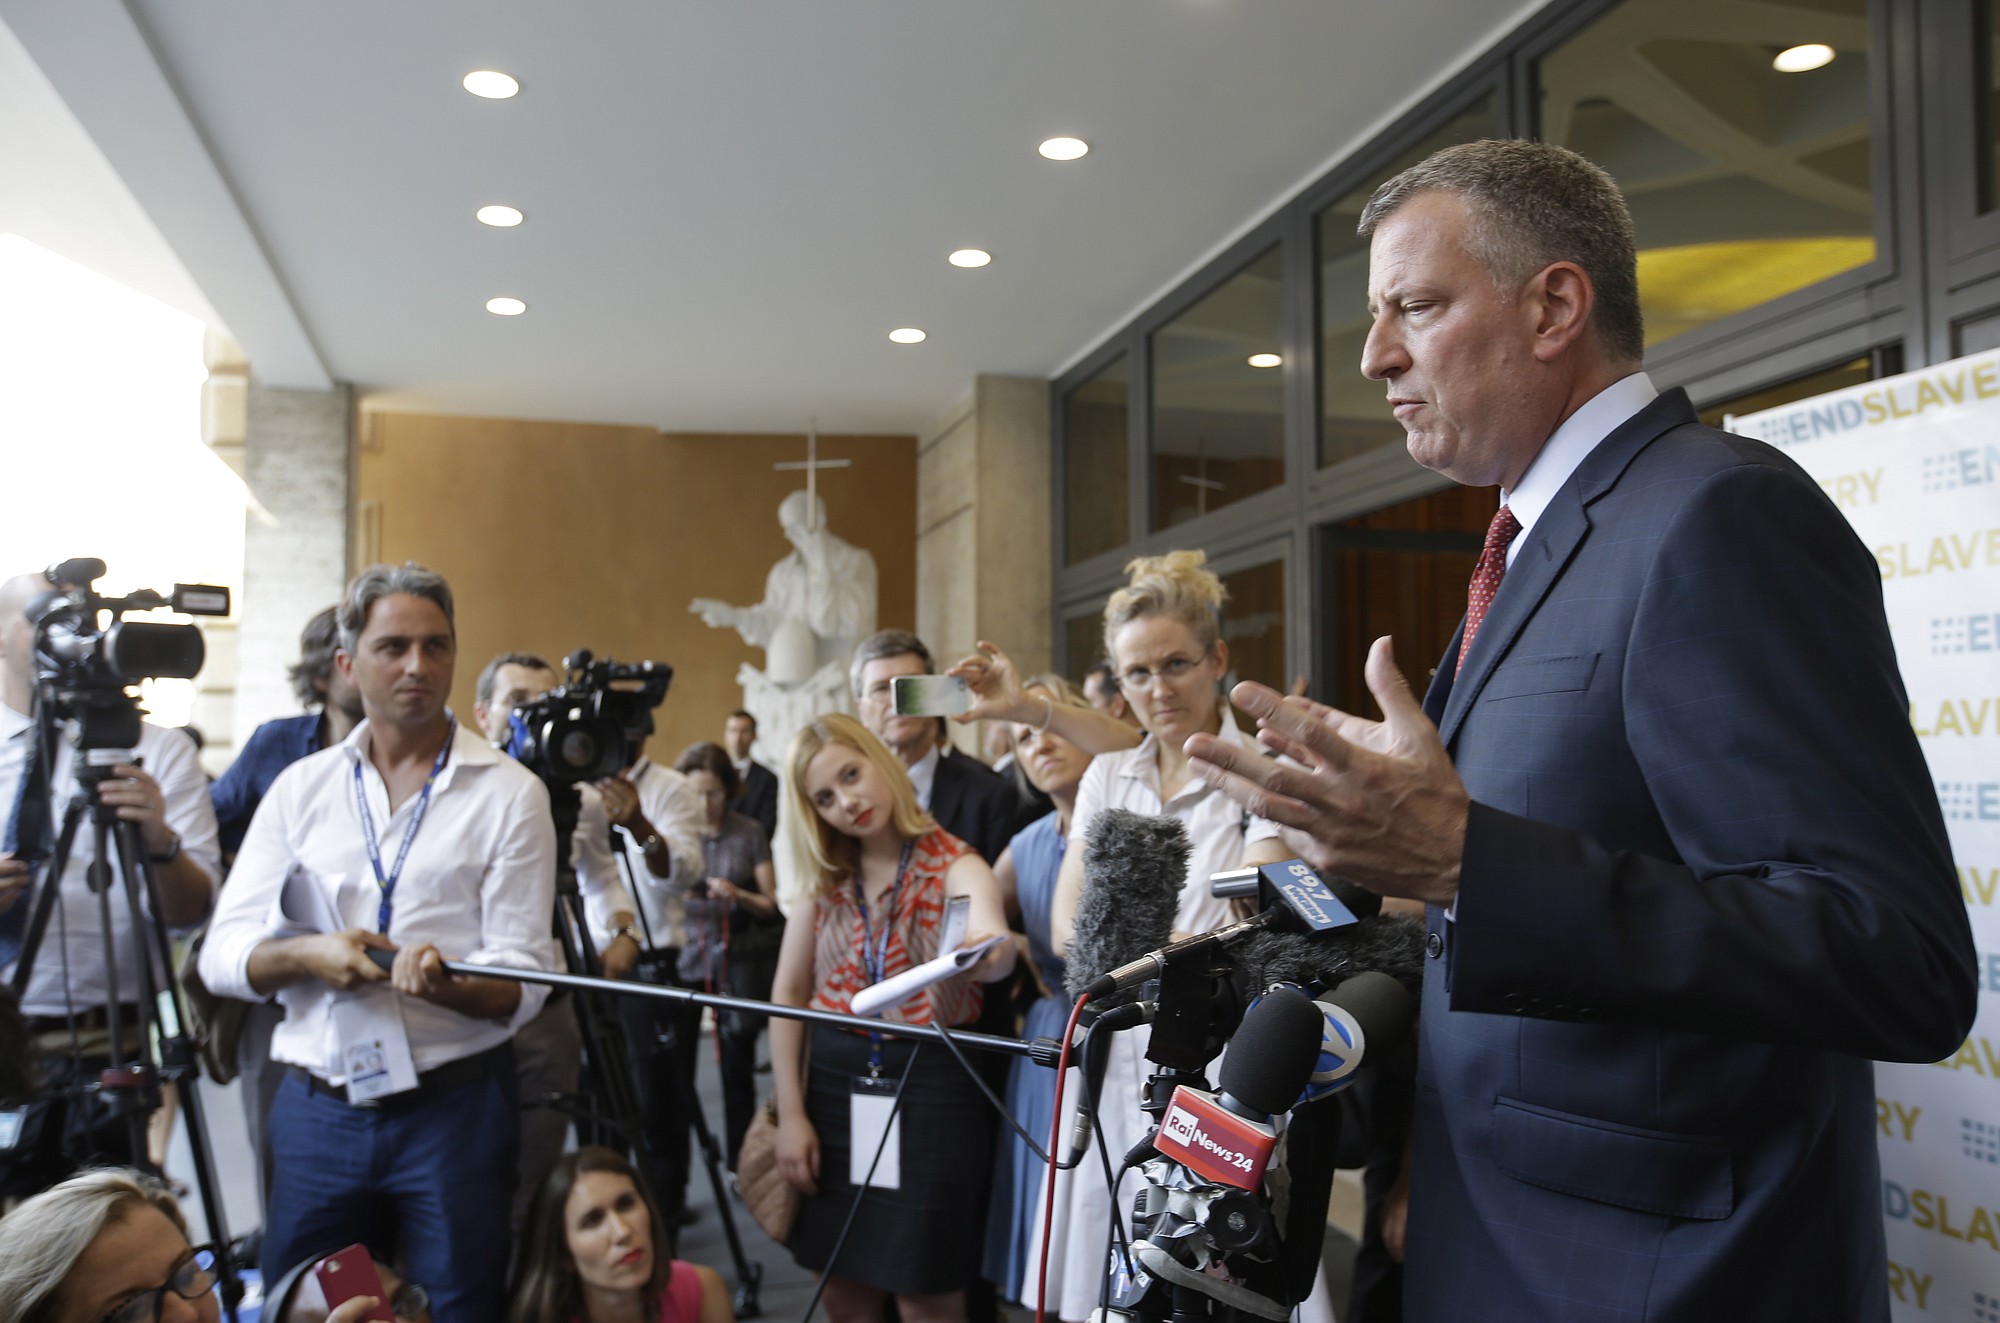 New York Mayor Bill de Blasio holds a press conference outside the Synod Hall after participating in a conference on Modern Slavery and Climate Change at the Vatican on Tuesday.